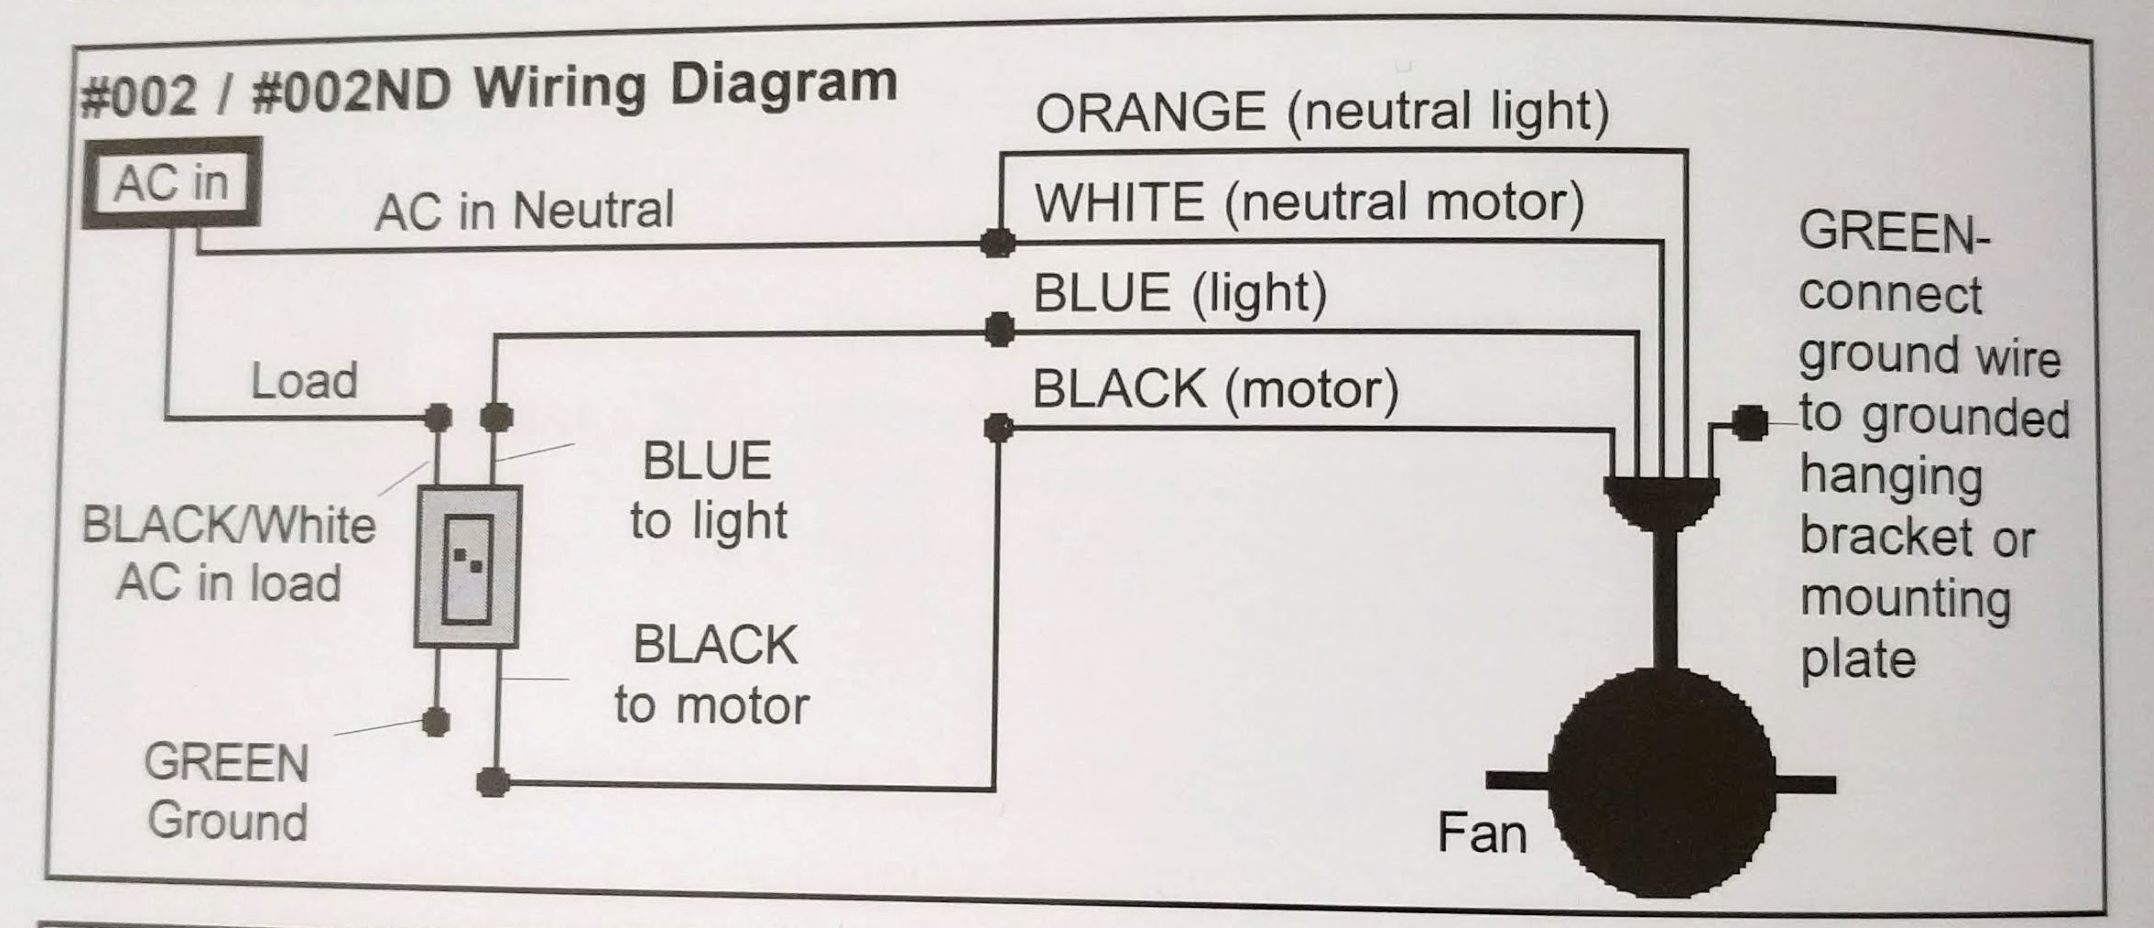 Wiring A Ceiling Fan With Black White Red Green In with size 2154 X 928